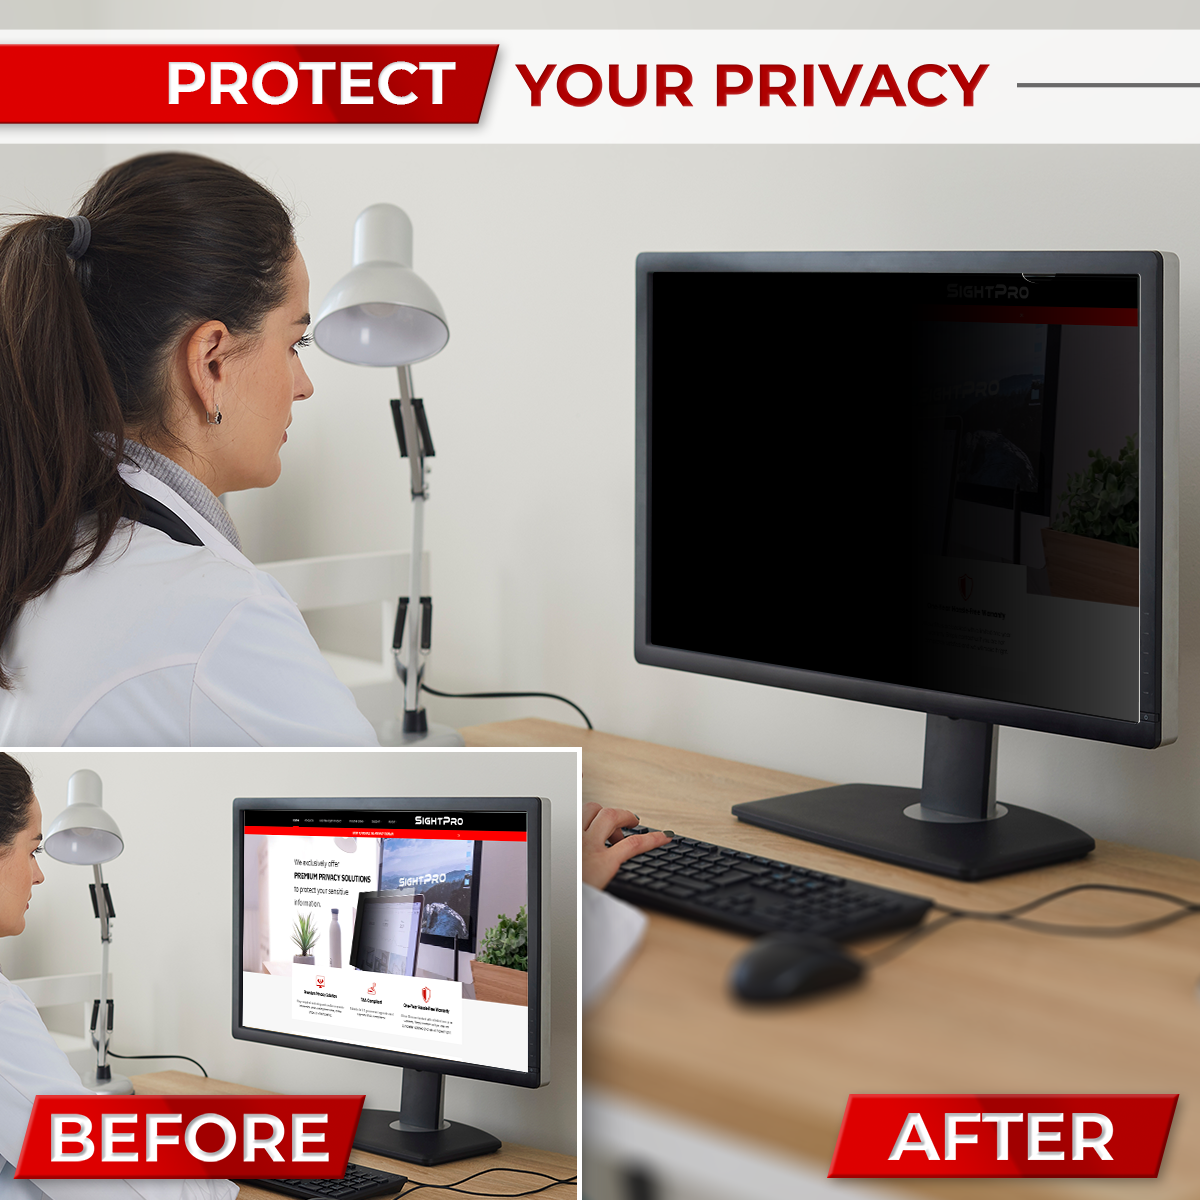 SightPro 24 Inch 16:9 Privacy Screen Filter for Computer Monitors